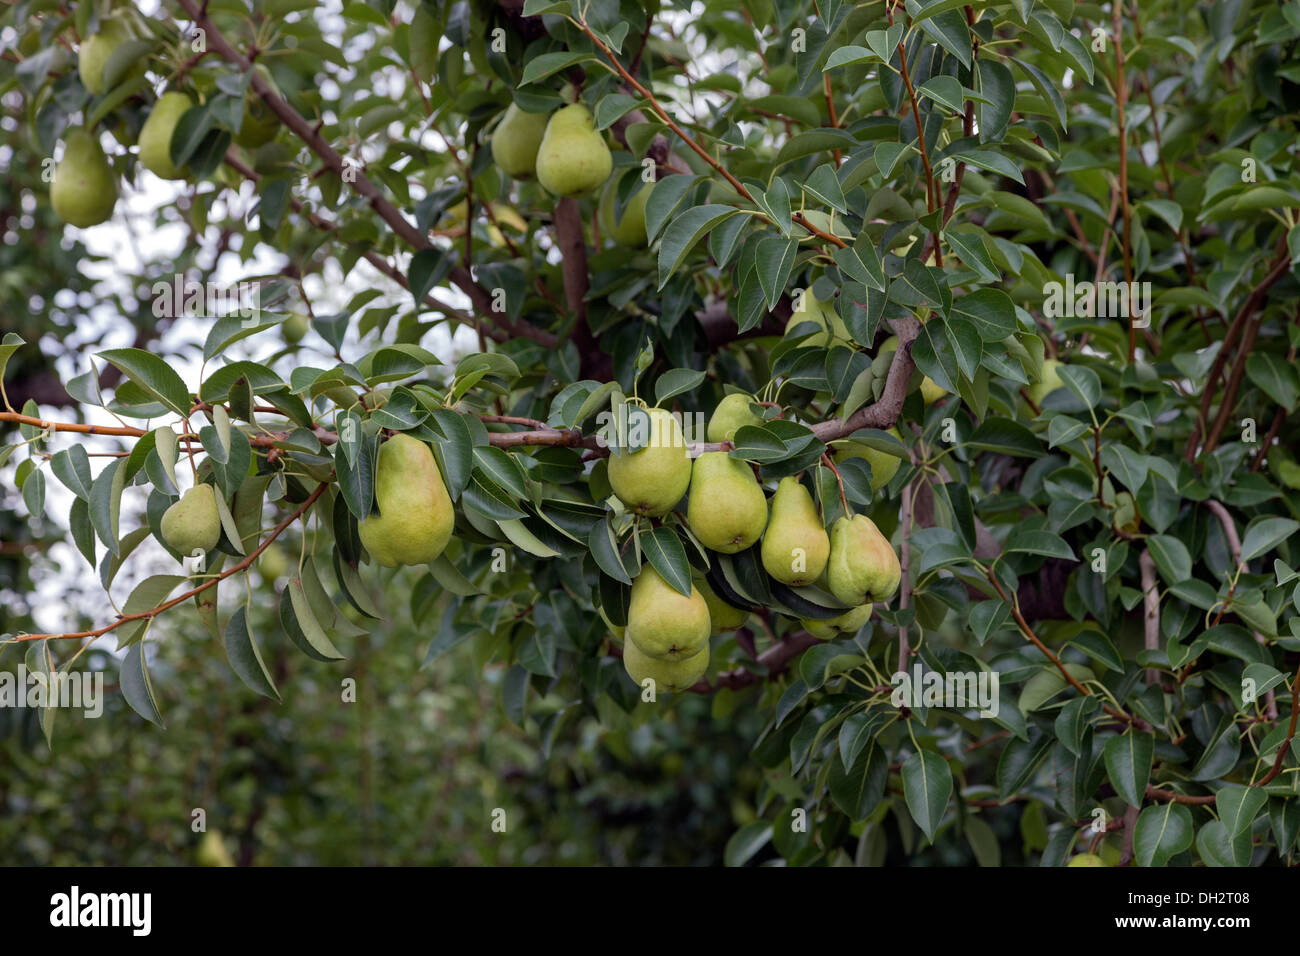 Fresh pears growing on the tree and o be used to make pear wine, Palisade, Colorado, USA Stock Photo